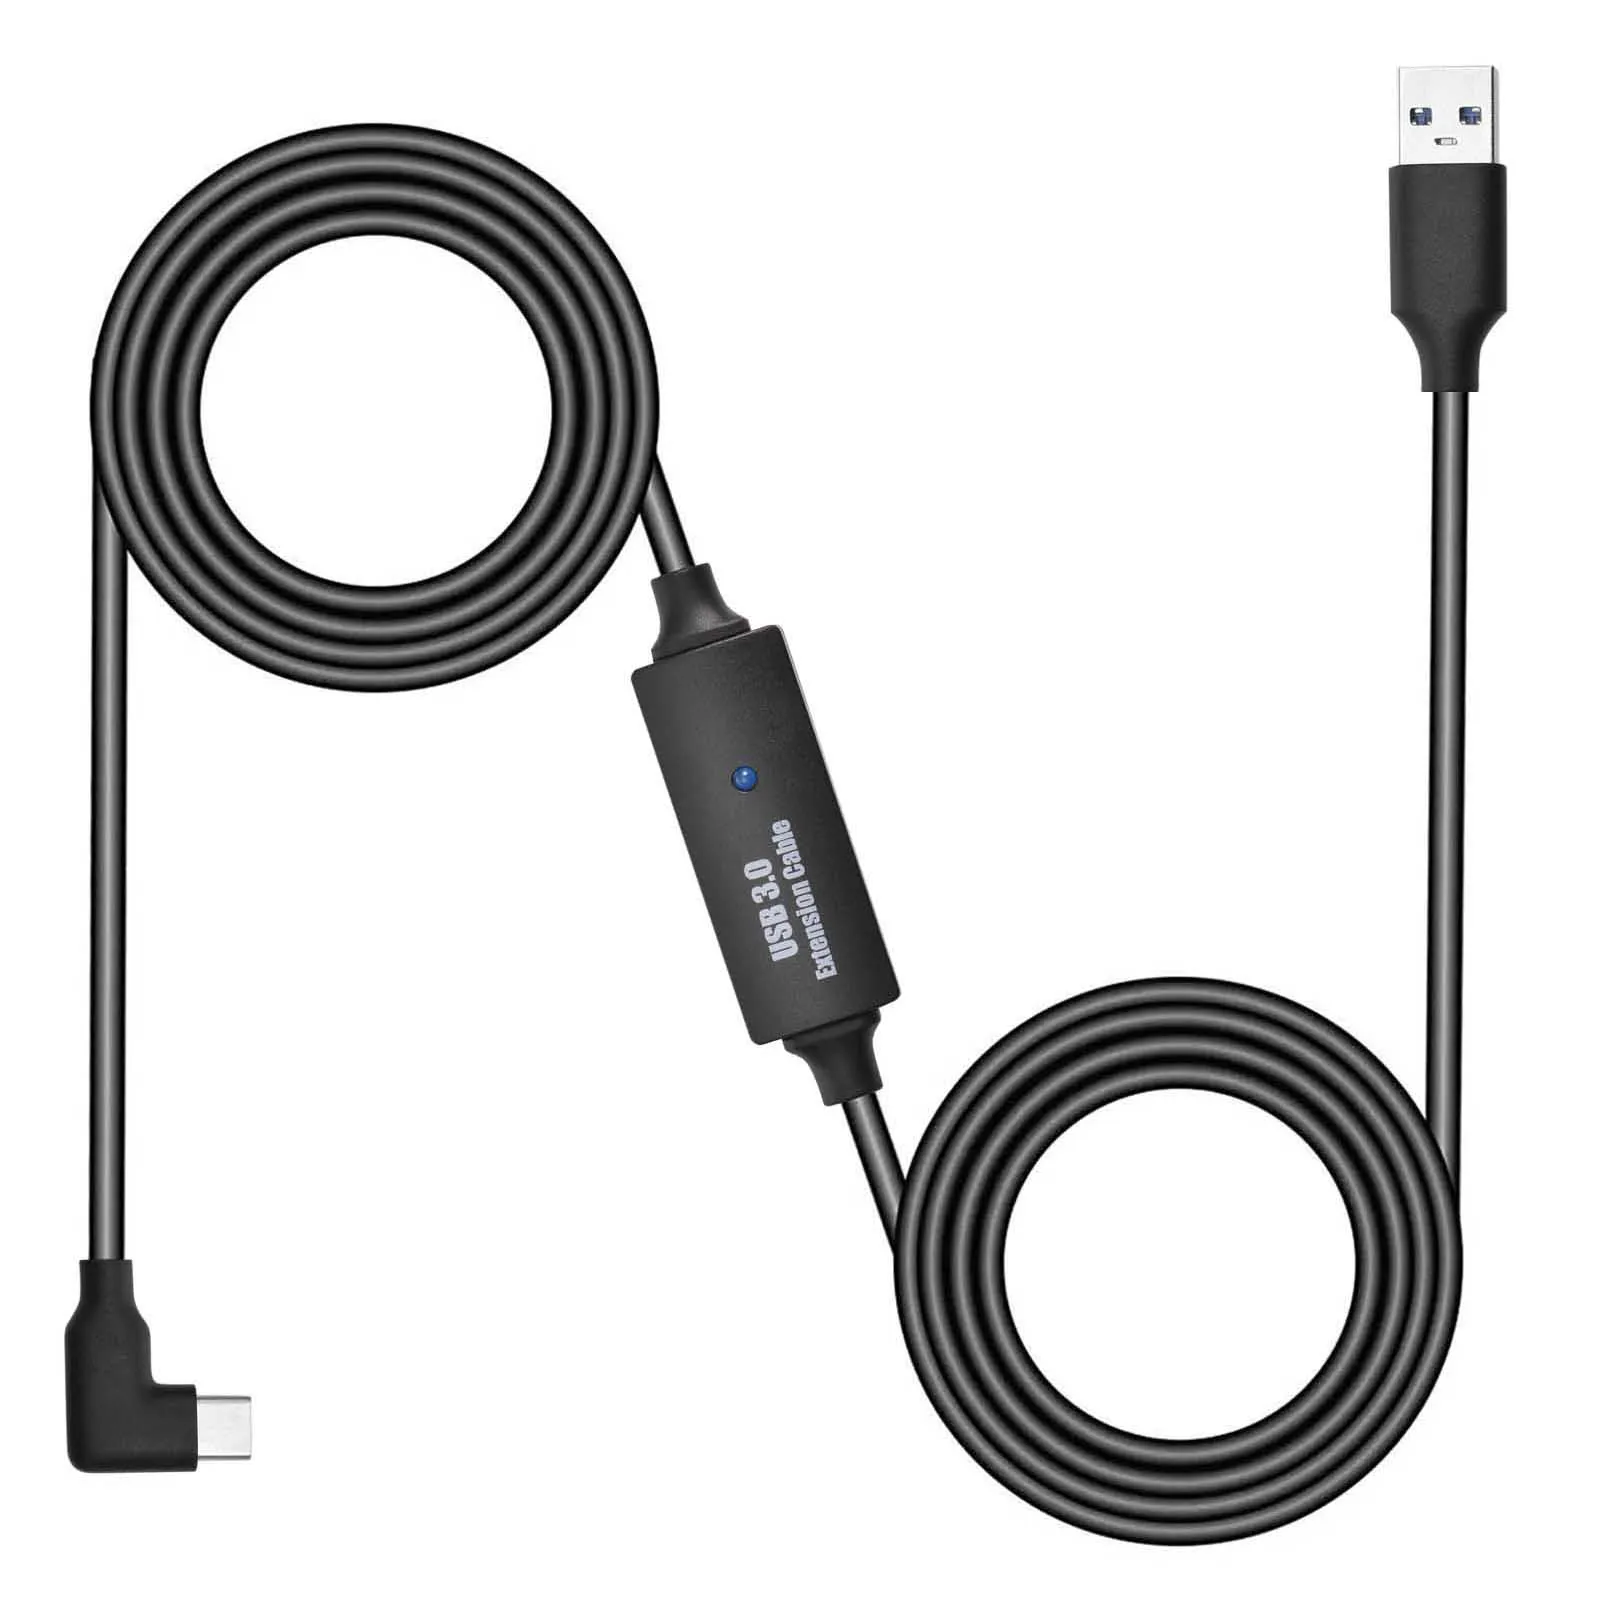 

5 Meters USB C To A Cable High Speed Data Transfer Cable For Oculus Quest VR Signal Connection Cable USB 3.0 Charging Cable